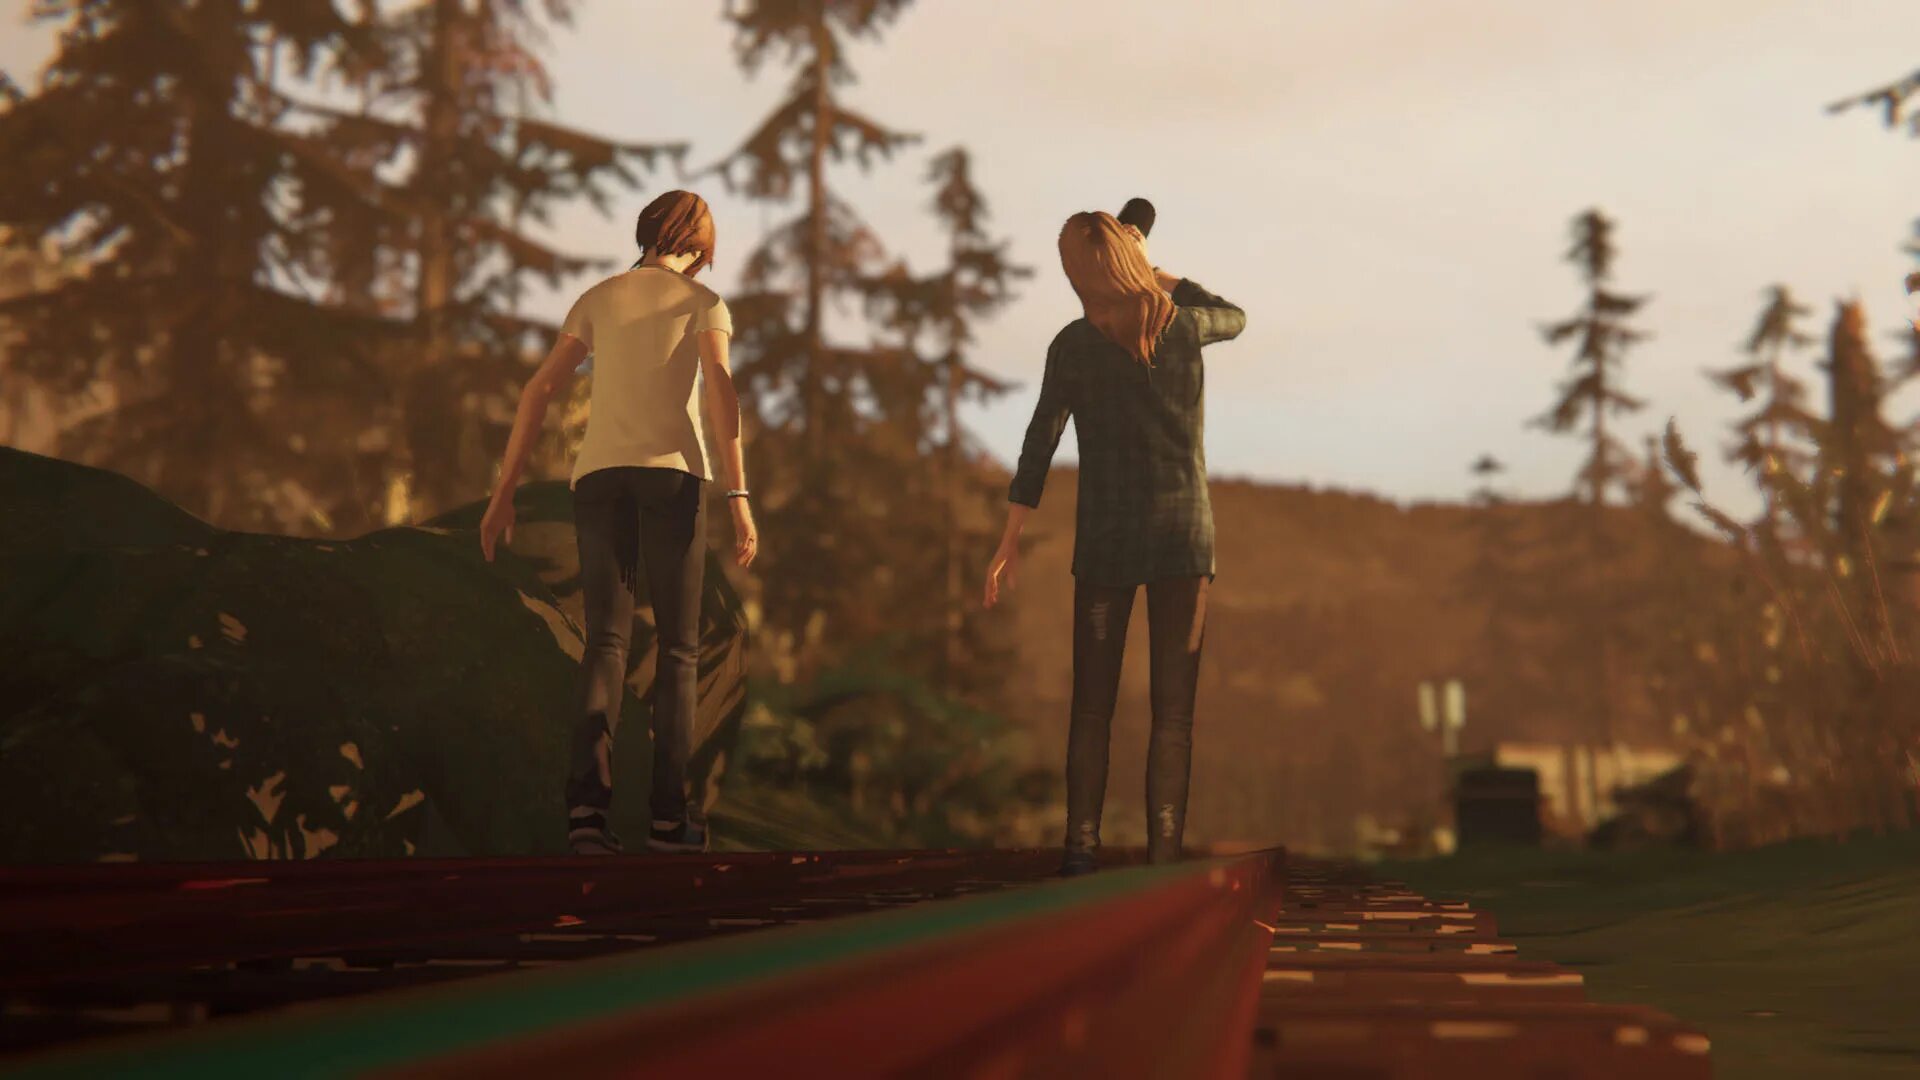 Life is action. Life is Strange: before the Storm. Life is Strange: before the Storm Wallpaper Рэйчел. Life is Strange before the Storm screenshots. Life is Strange BTS.